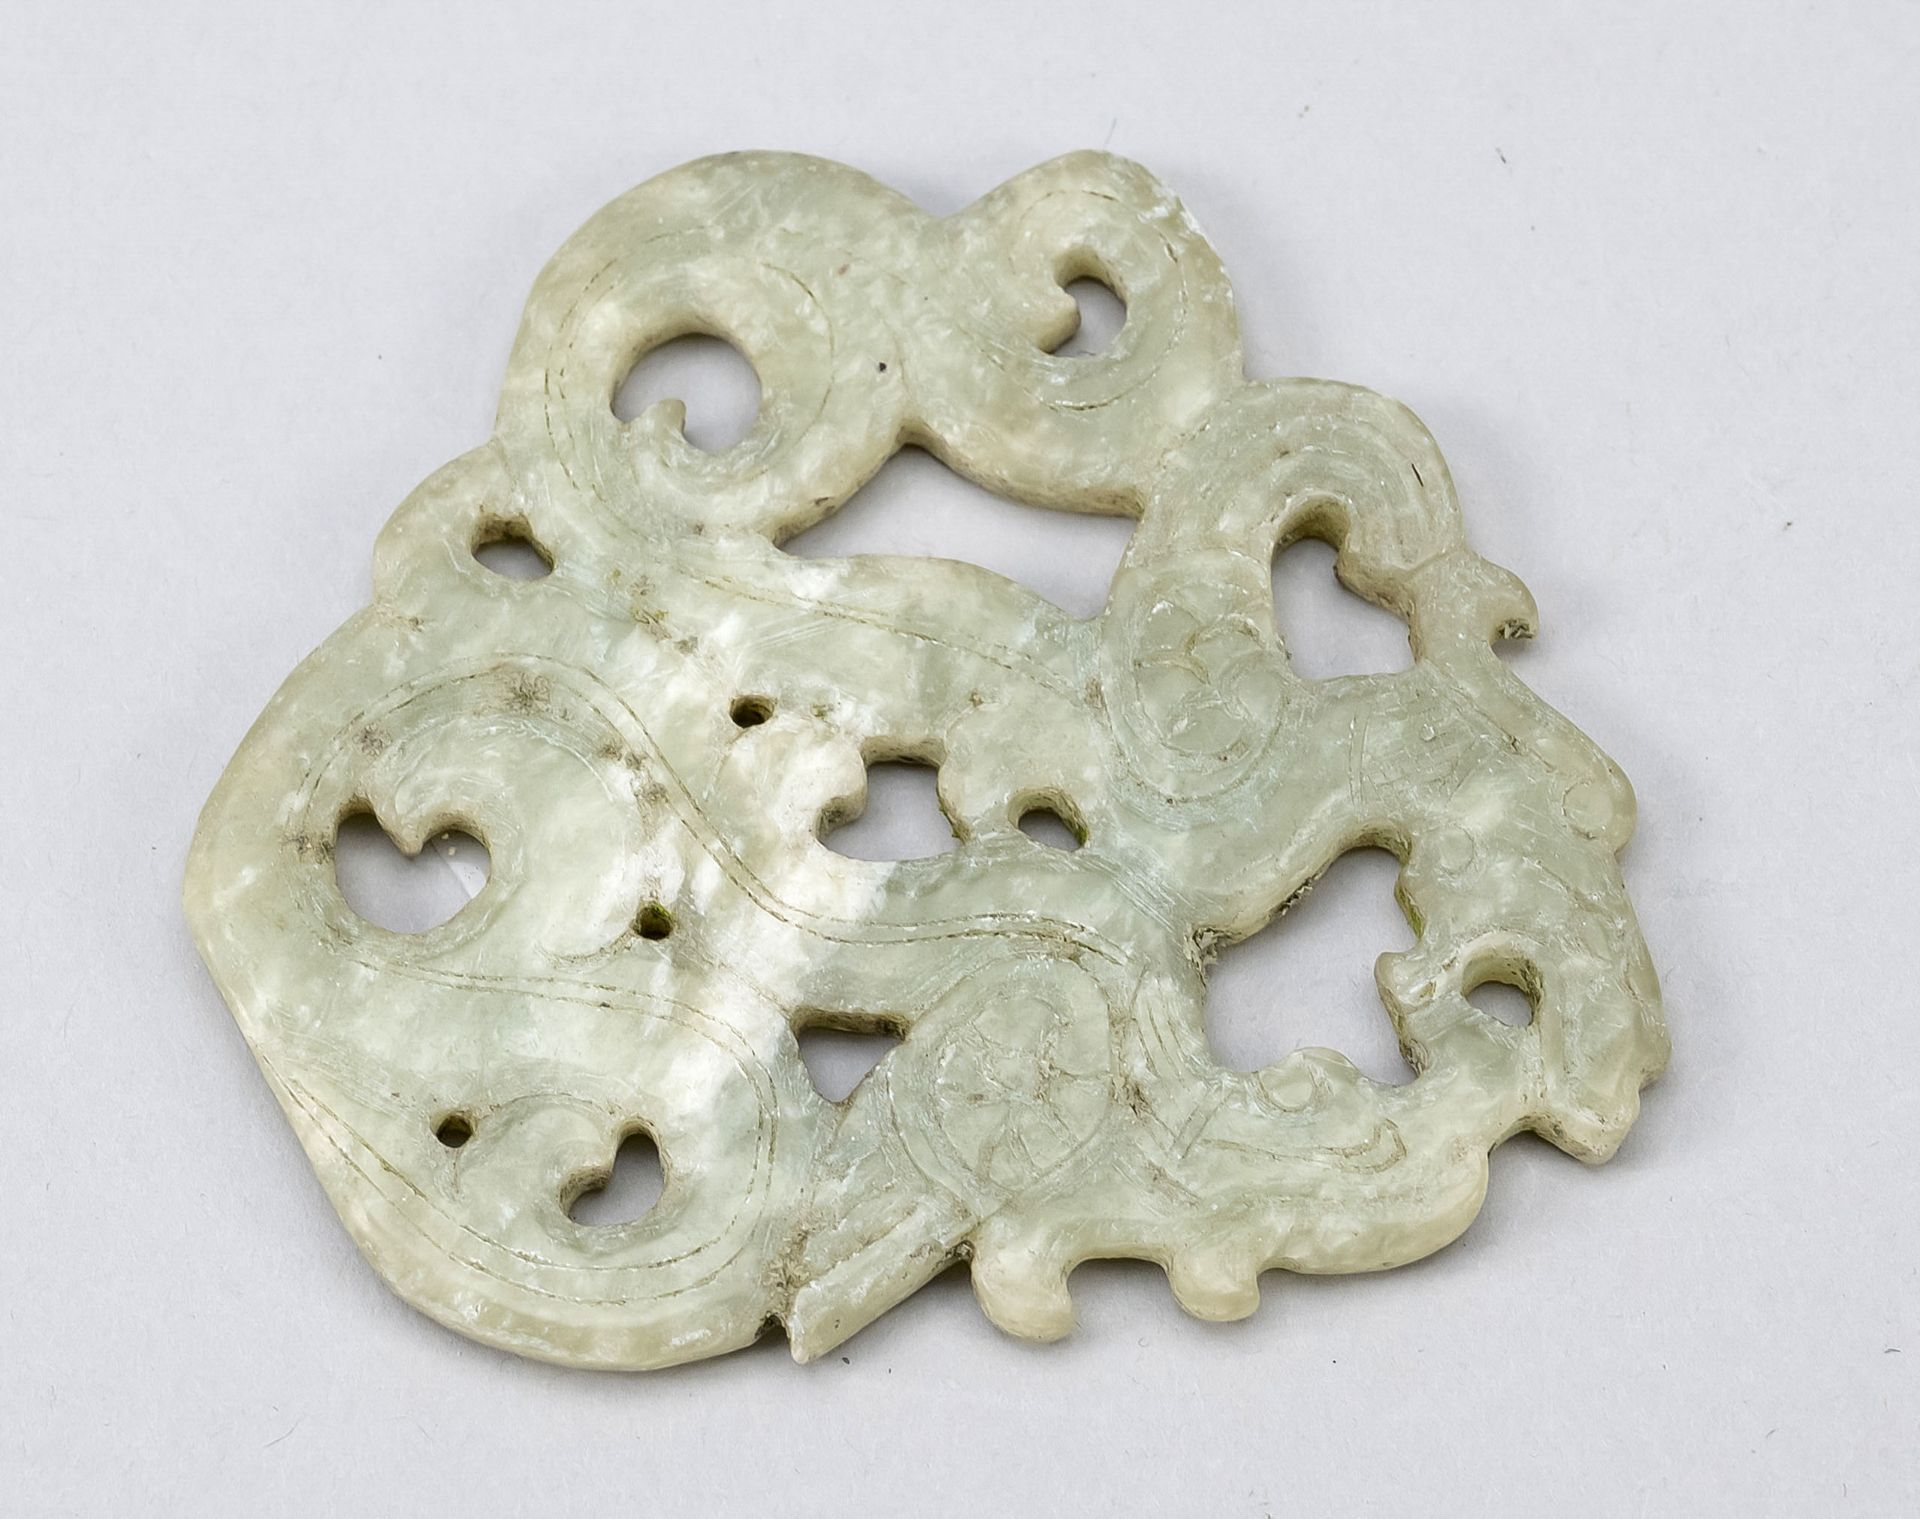 Bird dragon disc, China, probably Qing dynasty(1644-1911), jade carving with openwork wall,